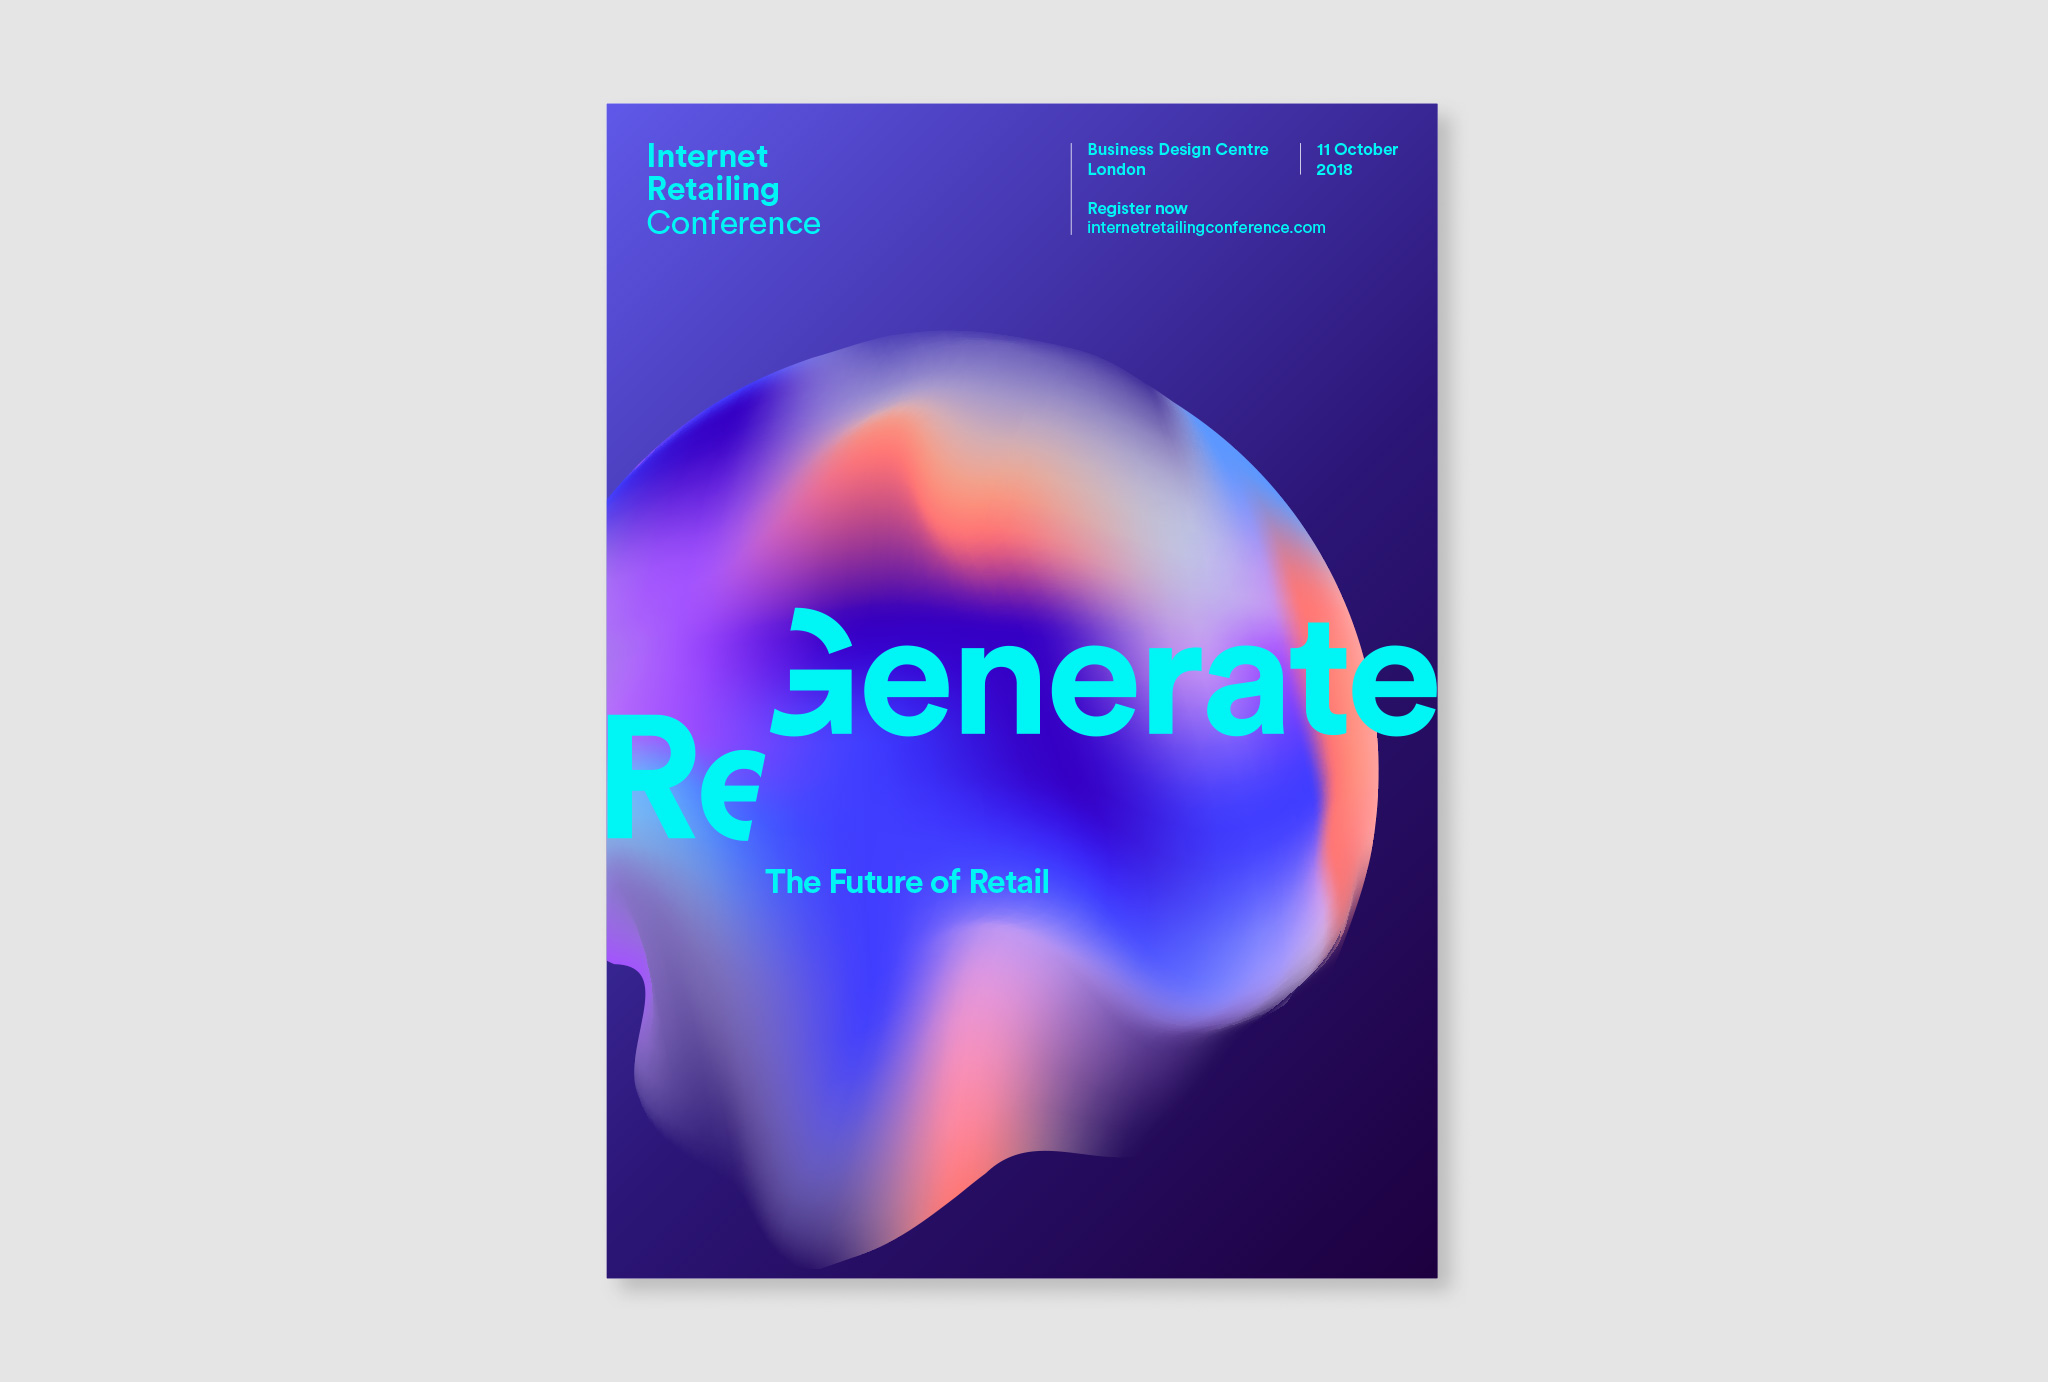 advertising campaign with a bubble in different colours, ‘Regenerate the future of retail’ written in turquoise in front